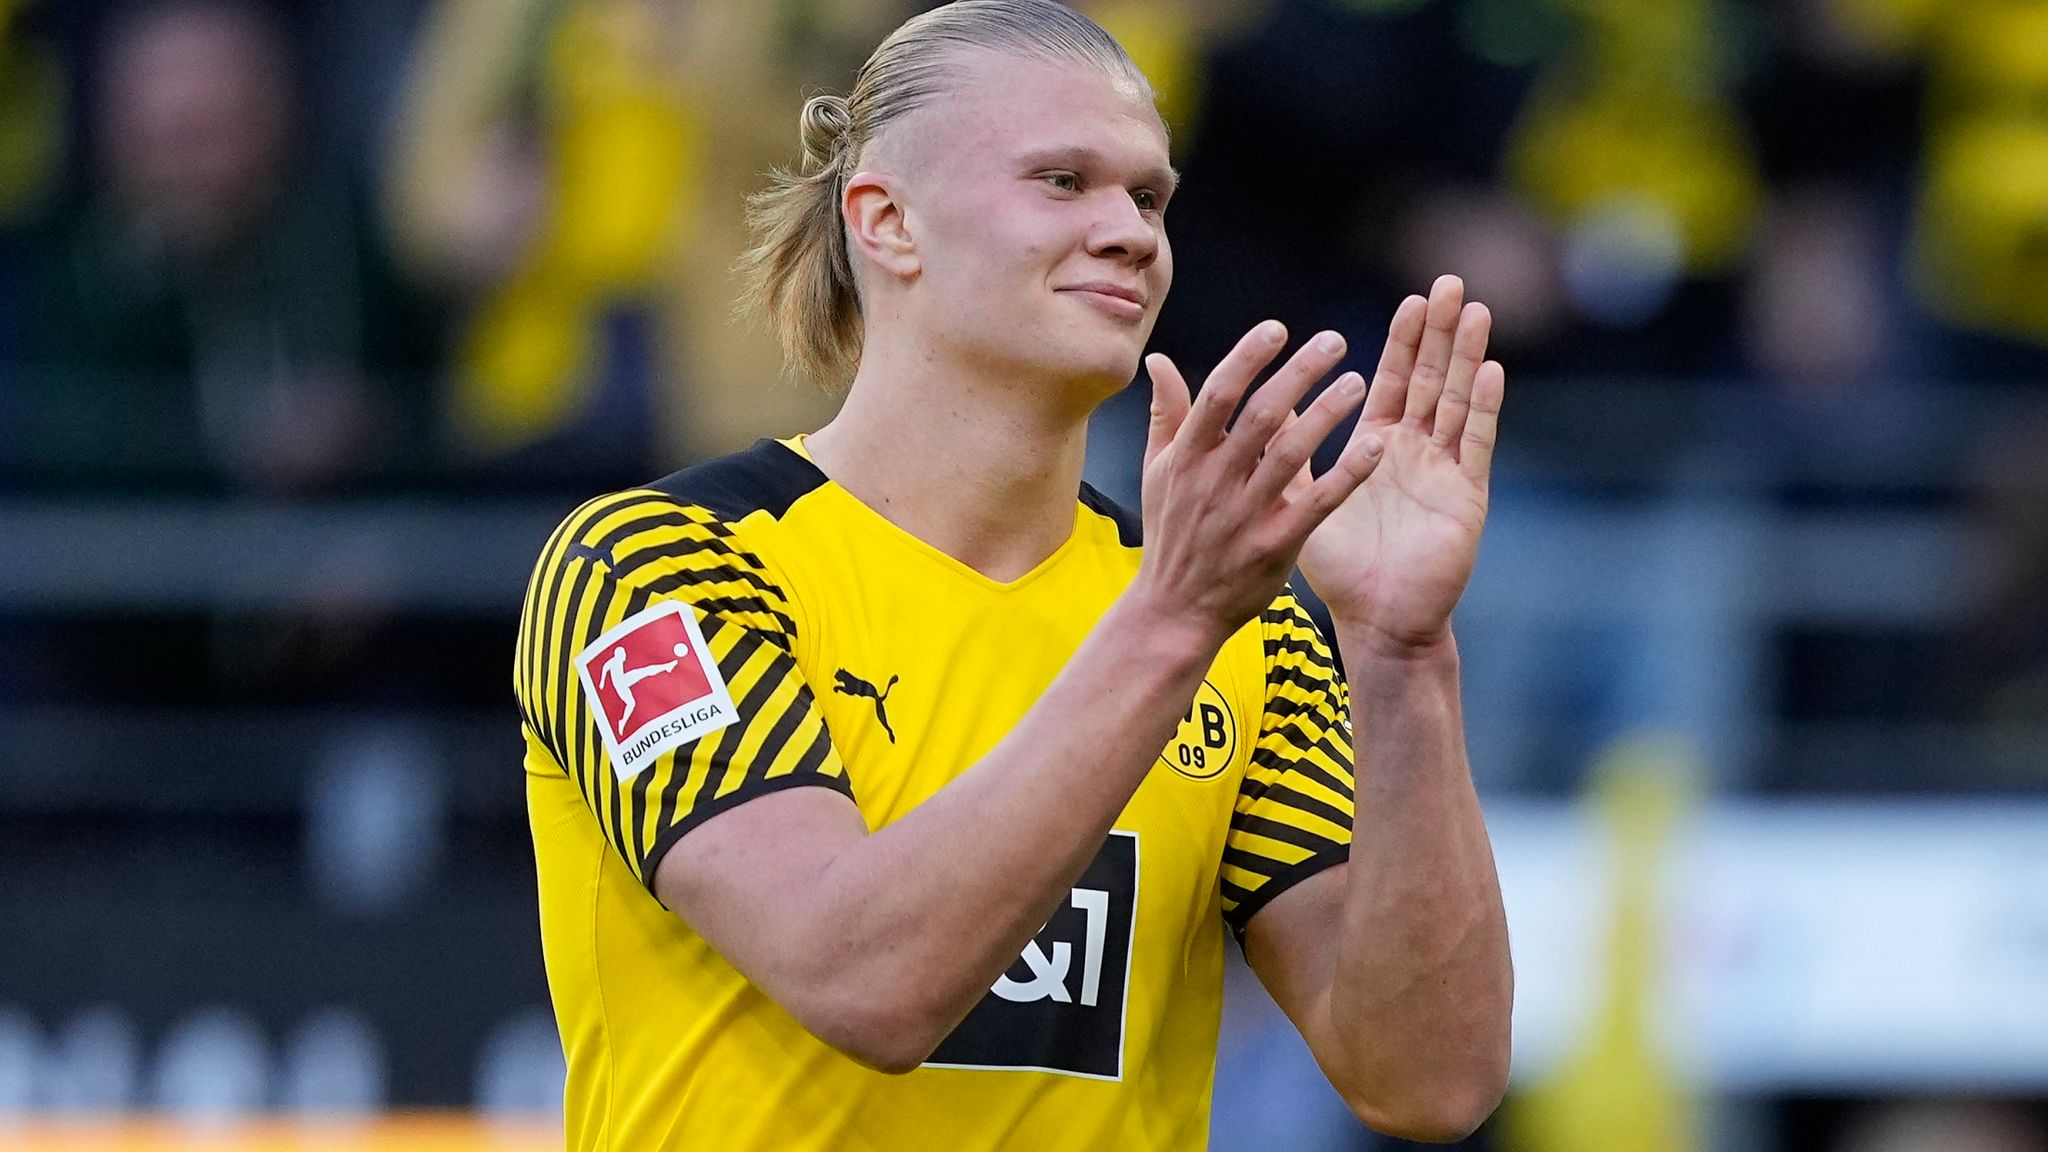 Manchester City confirms Erling Haaland signing for £51.2m and the Striker start on 1st July 2022